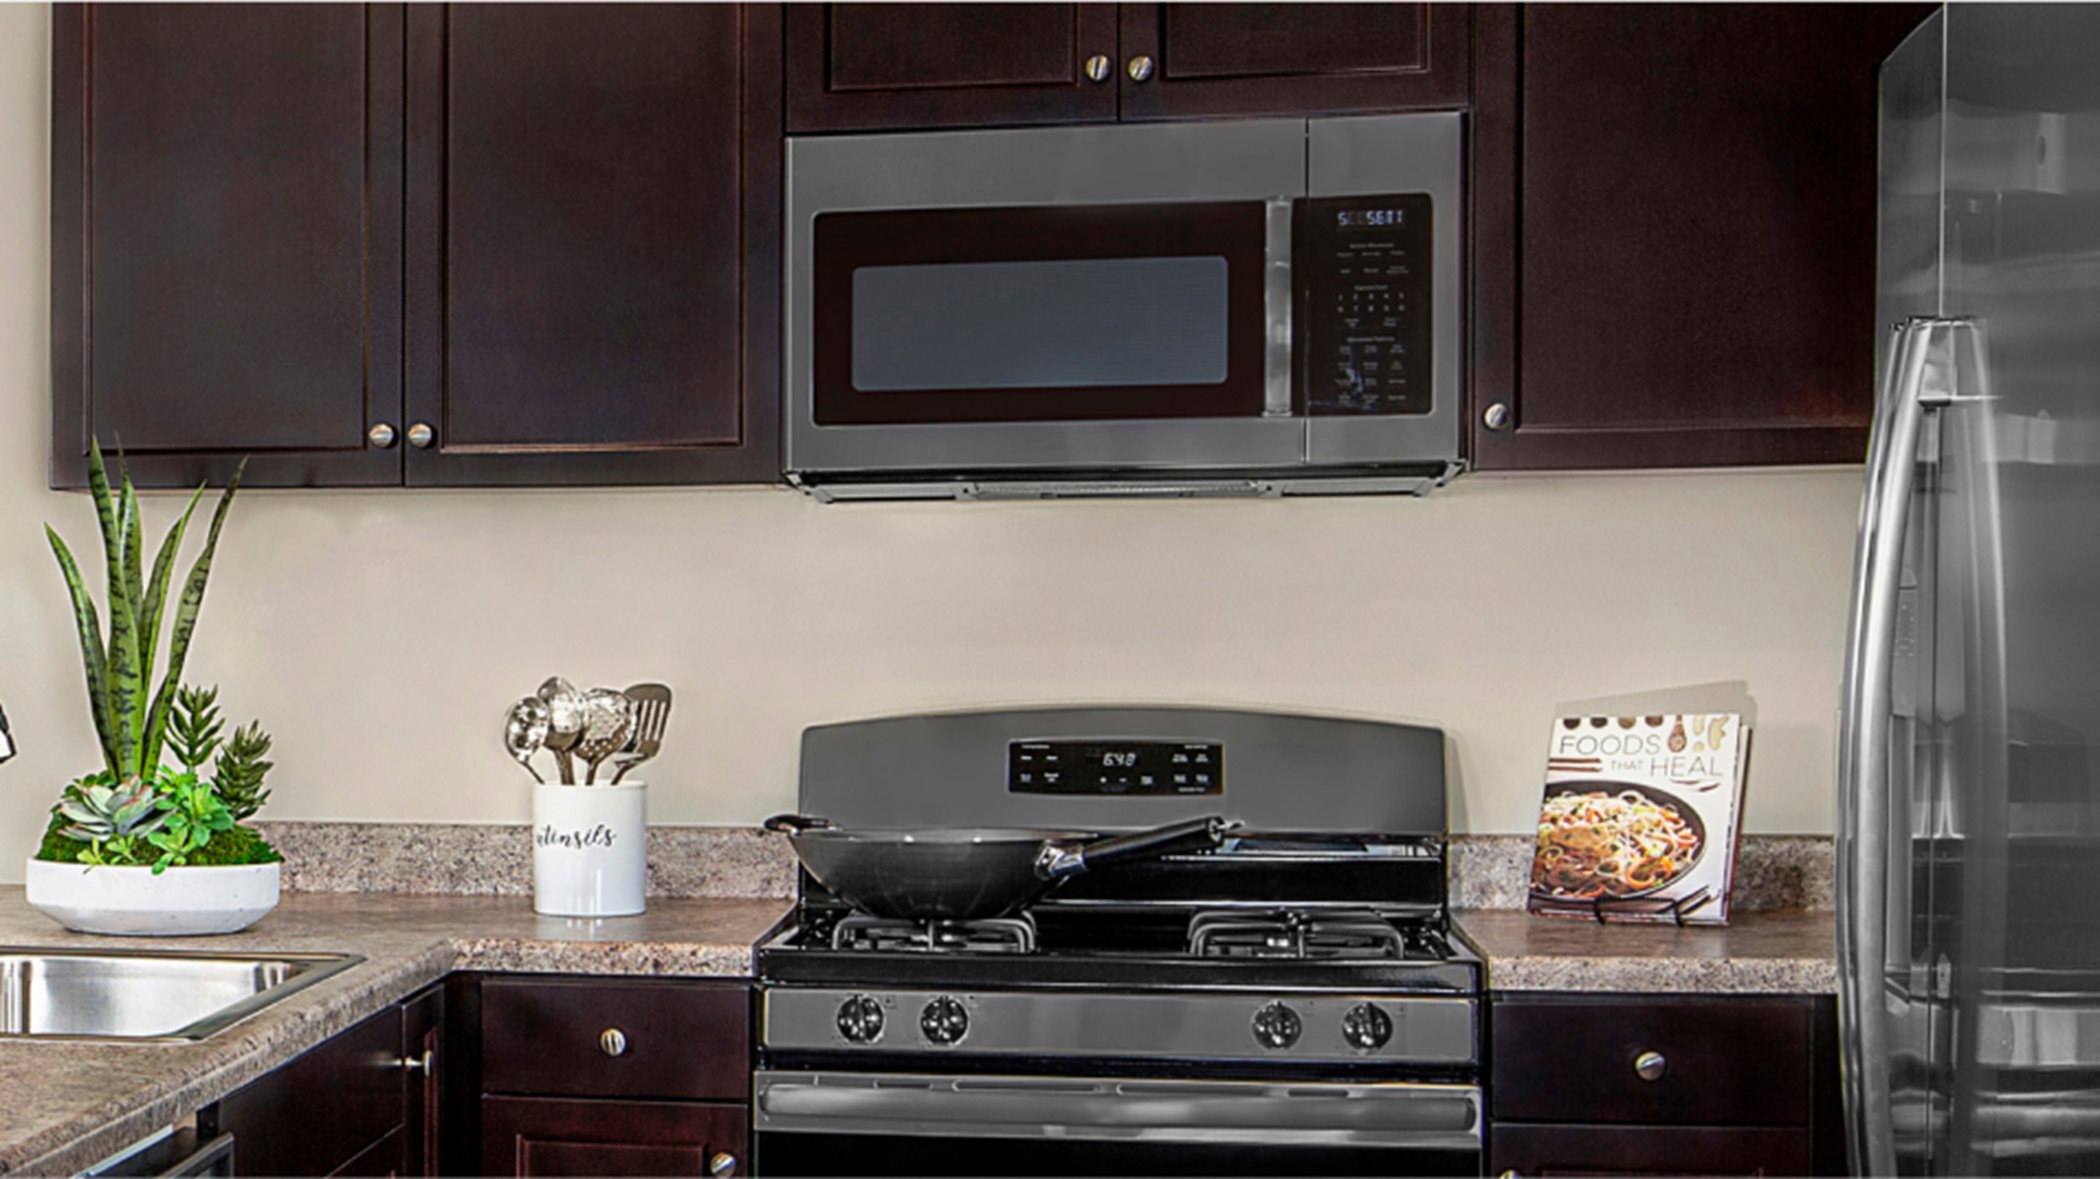 Menifee Town Center The Townes Residence One Kitchen Appliance